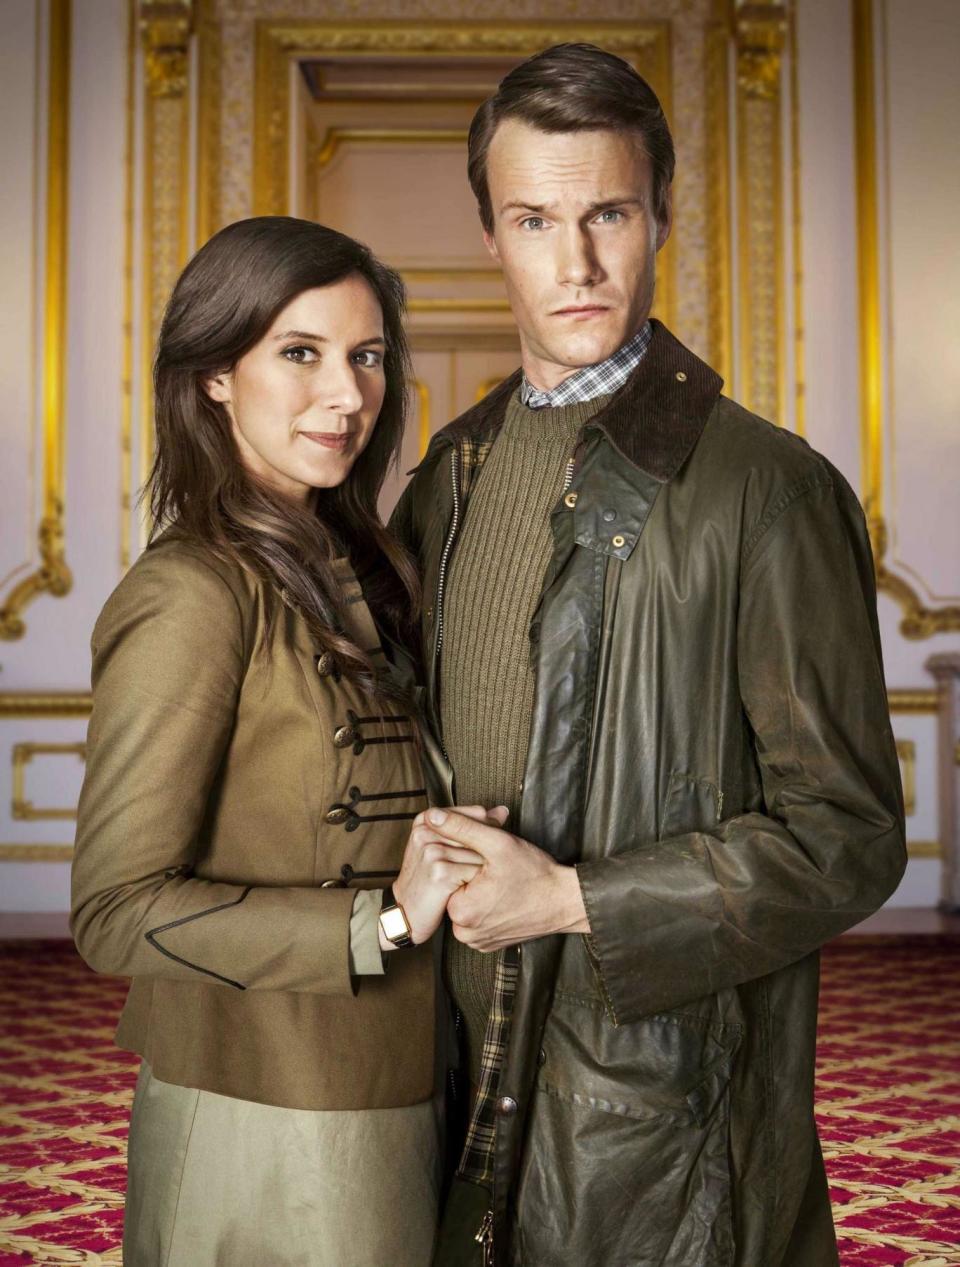 Prince William is played by Hugh Skinner with Kate who is played by Louise Ford